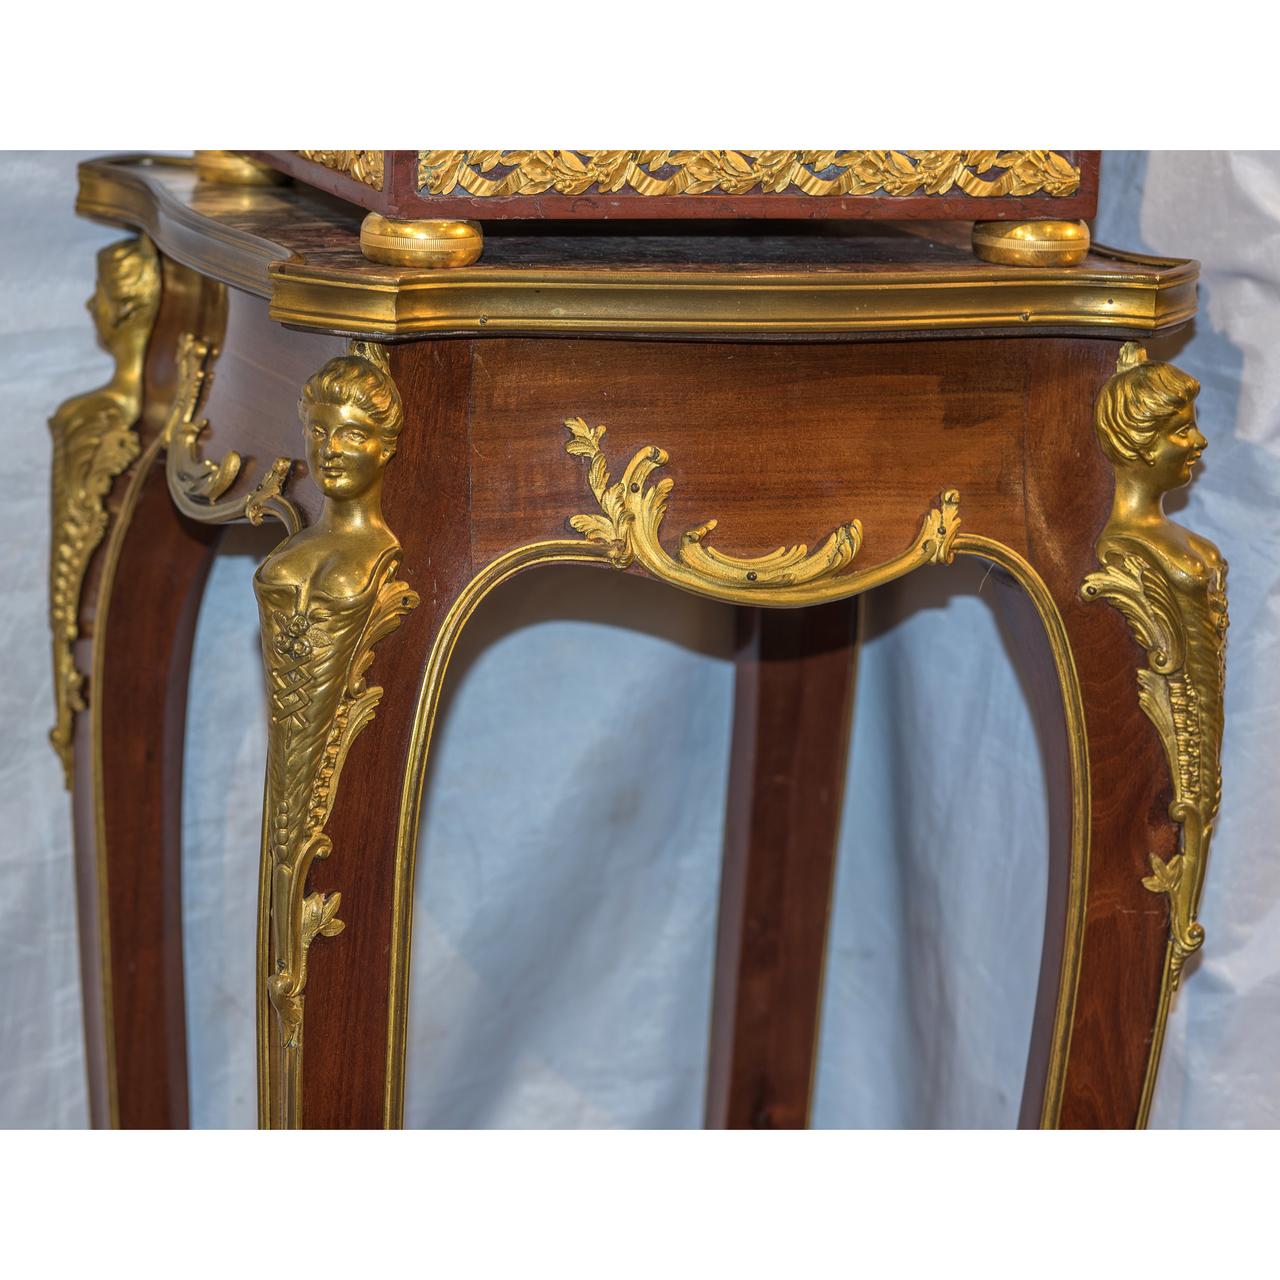 19th Century French Mahogany Marble-Top Pedestal with Ormolu Mounts For Sale